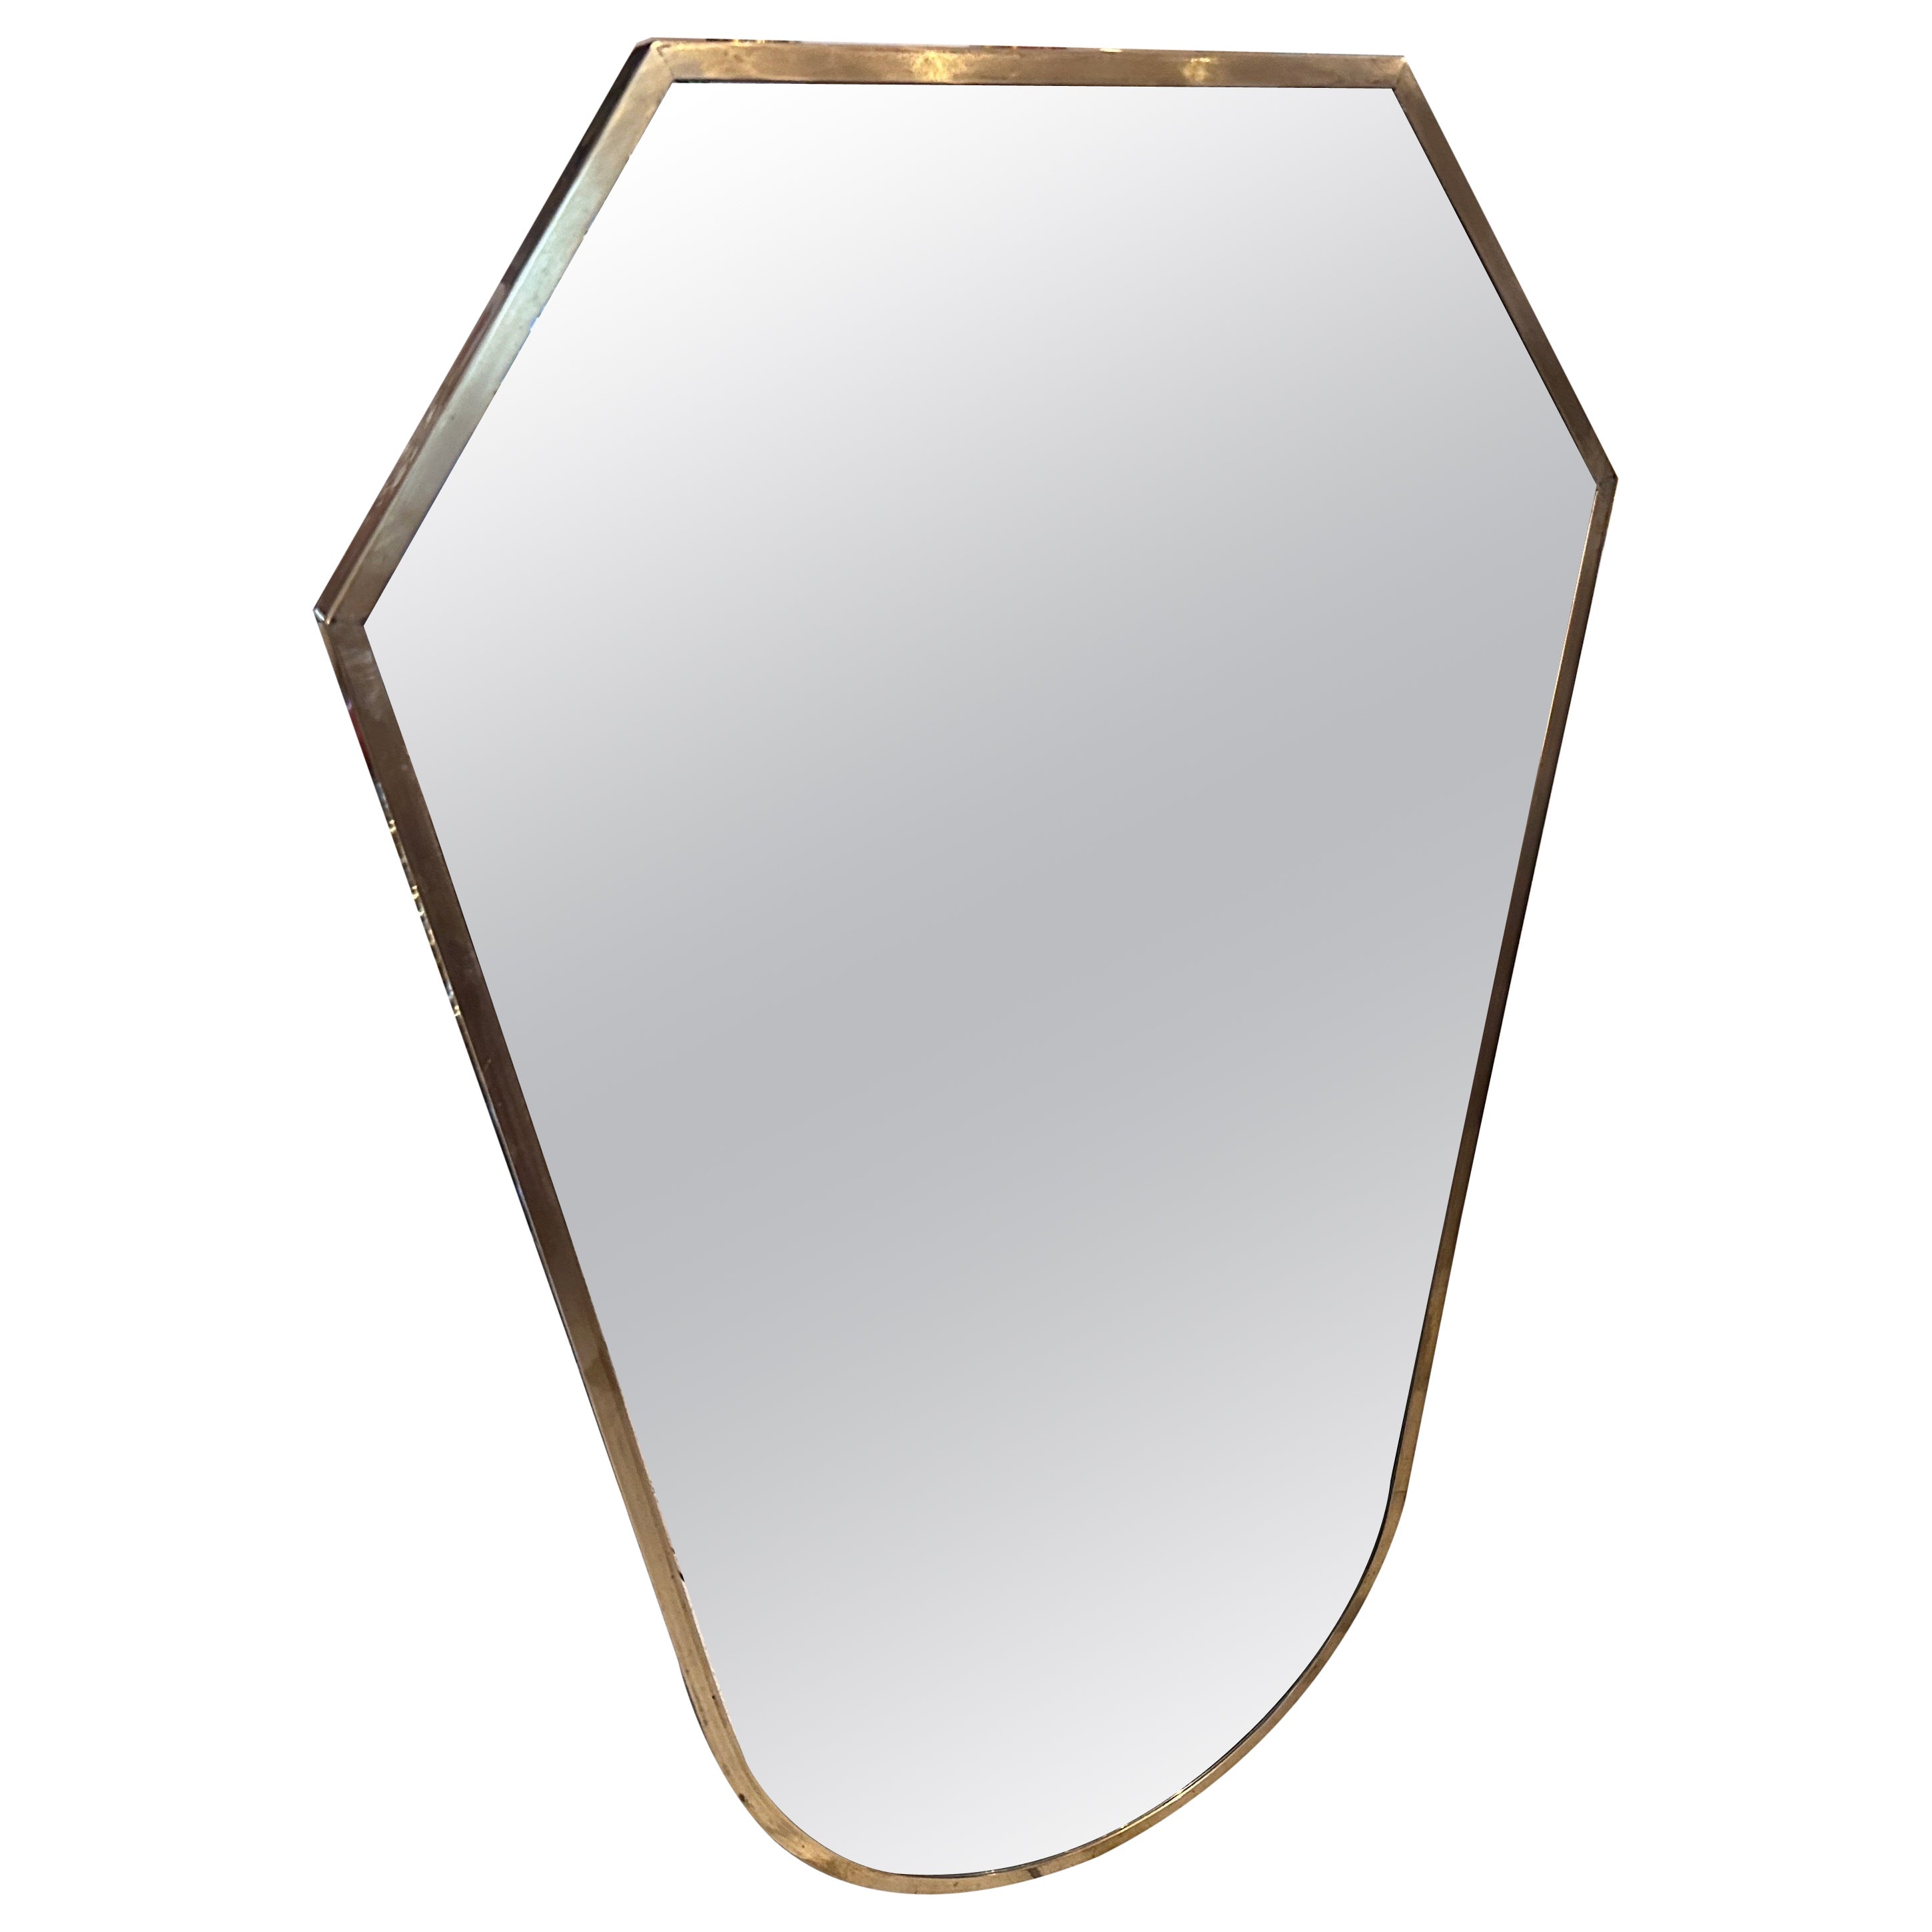 1950s Mid-Century Modern Giò Ponti Style Solid Brass Italian Wall Mirror For Sale